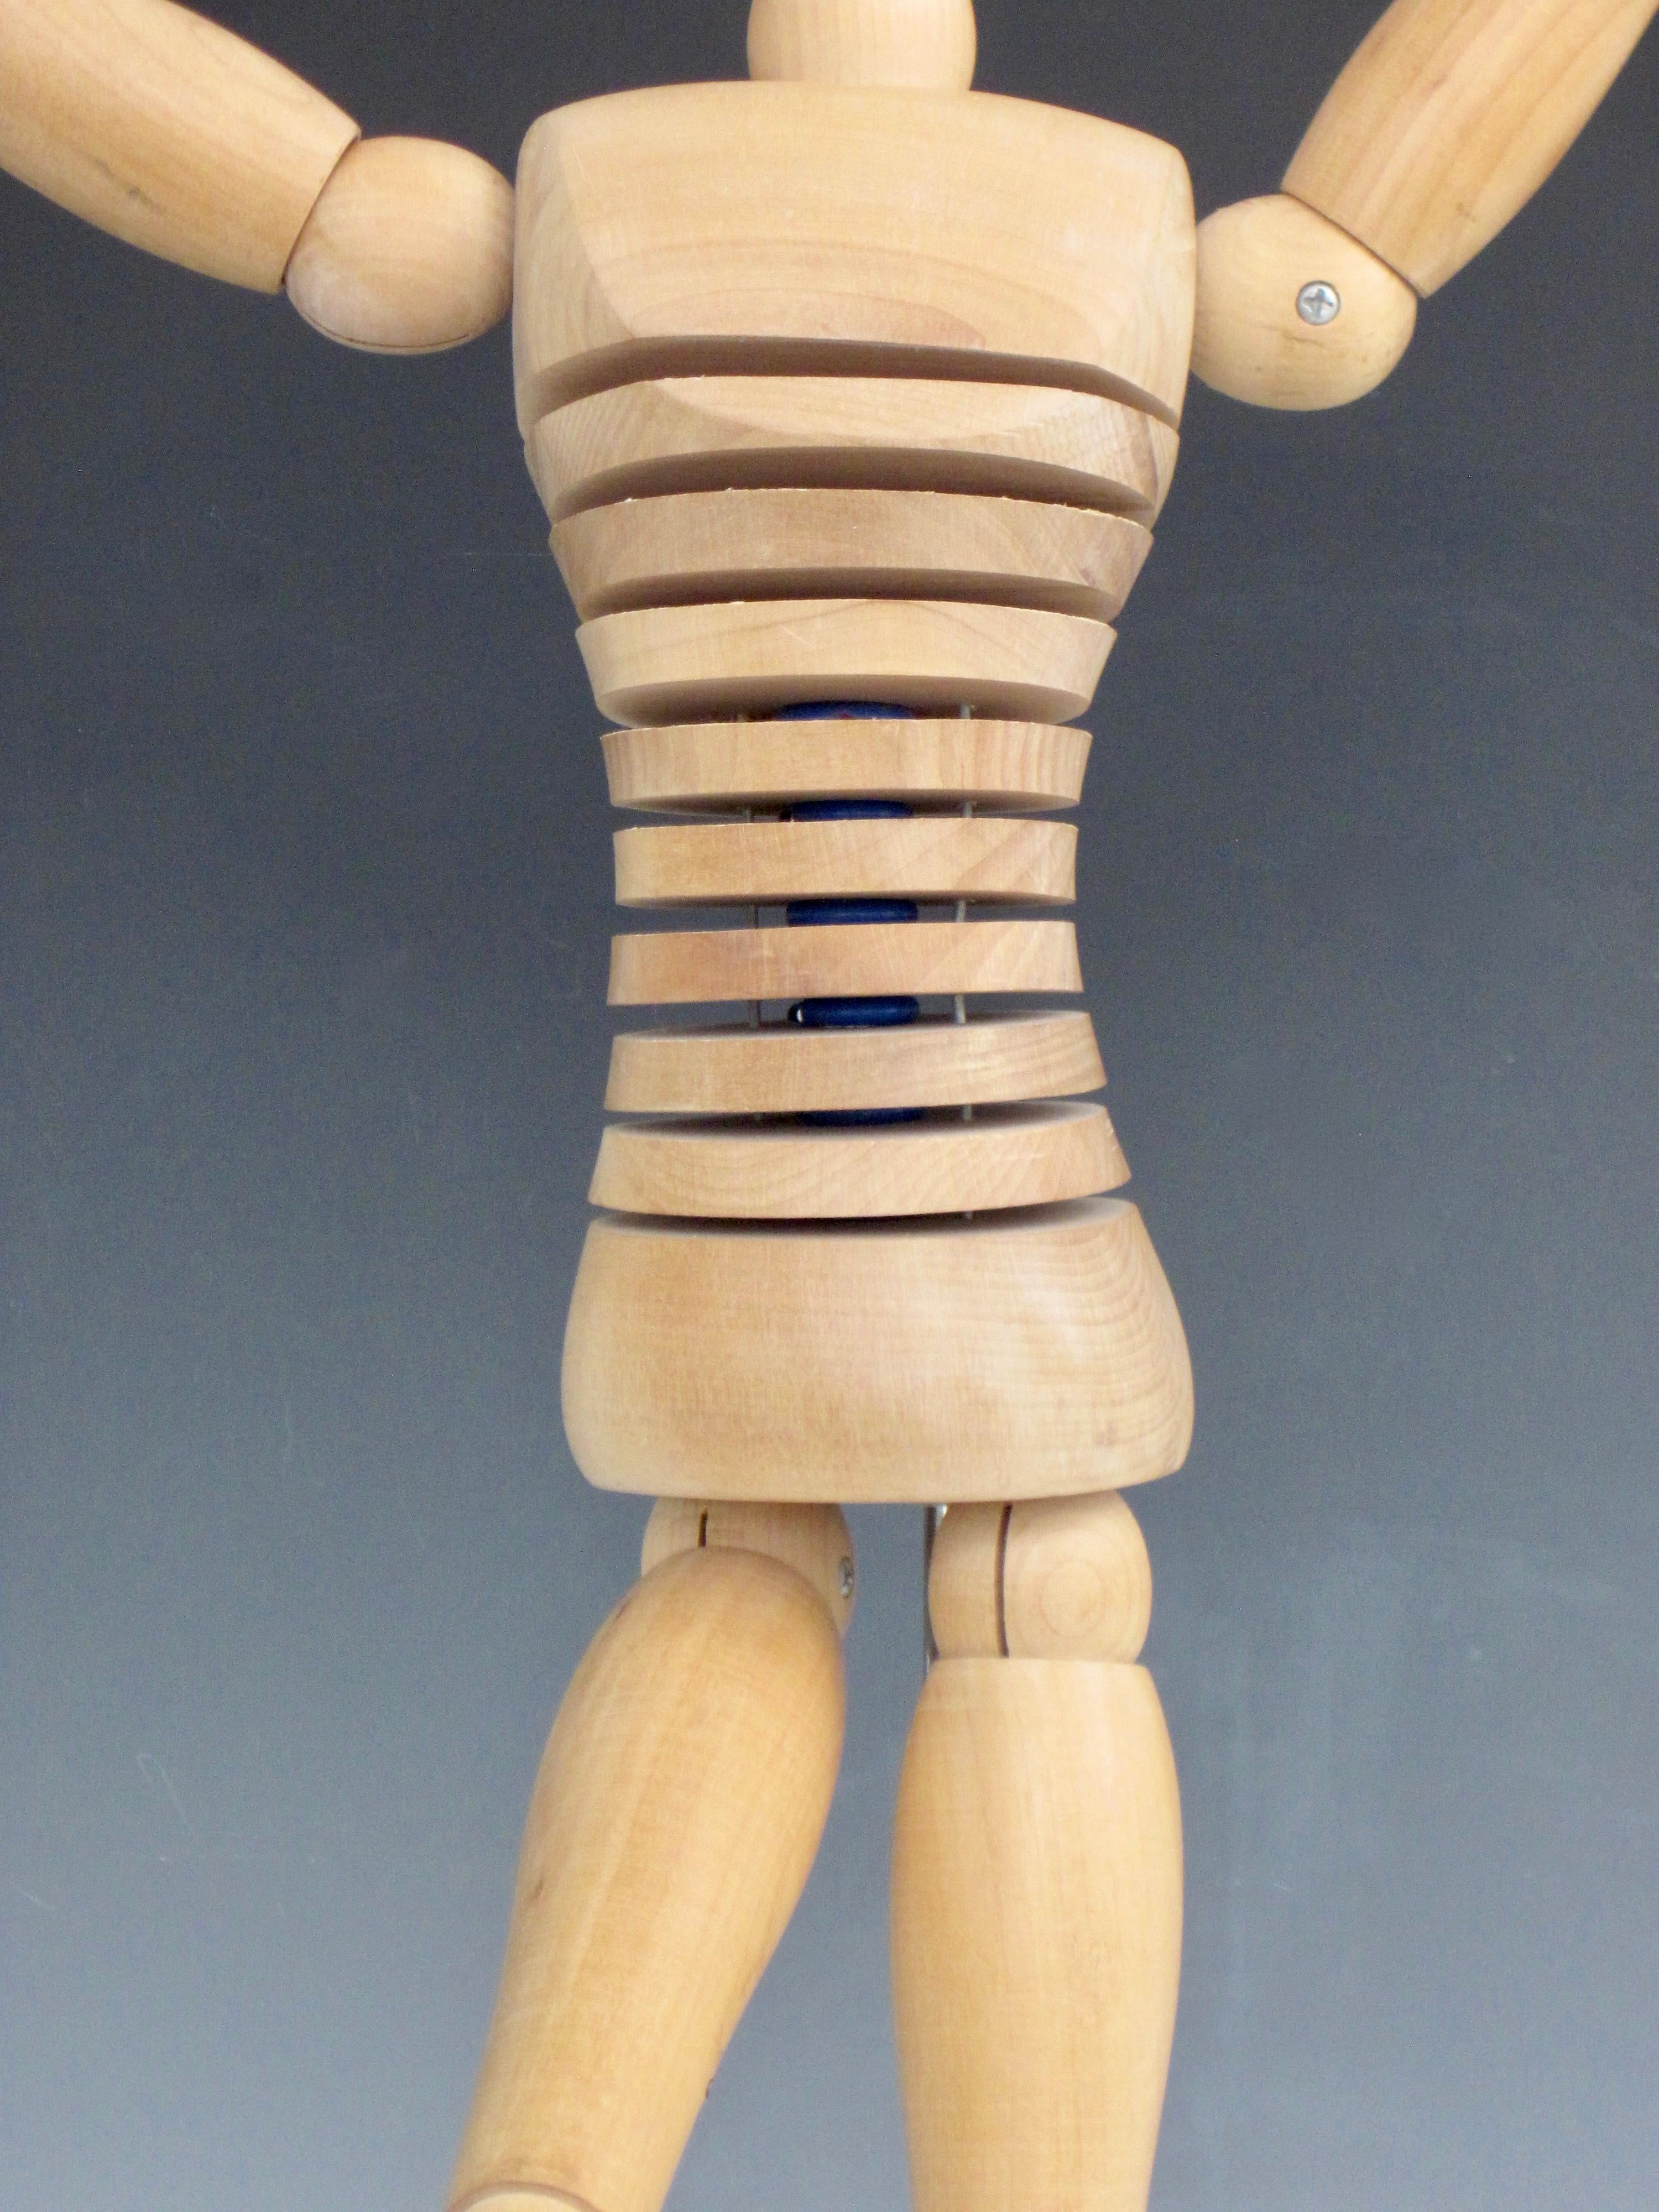 Posable Jointed Wooden Human Figure Artist Mannequin In Good Condition For Sale In Ferndale, MI